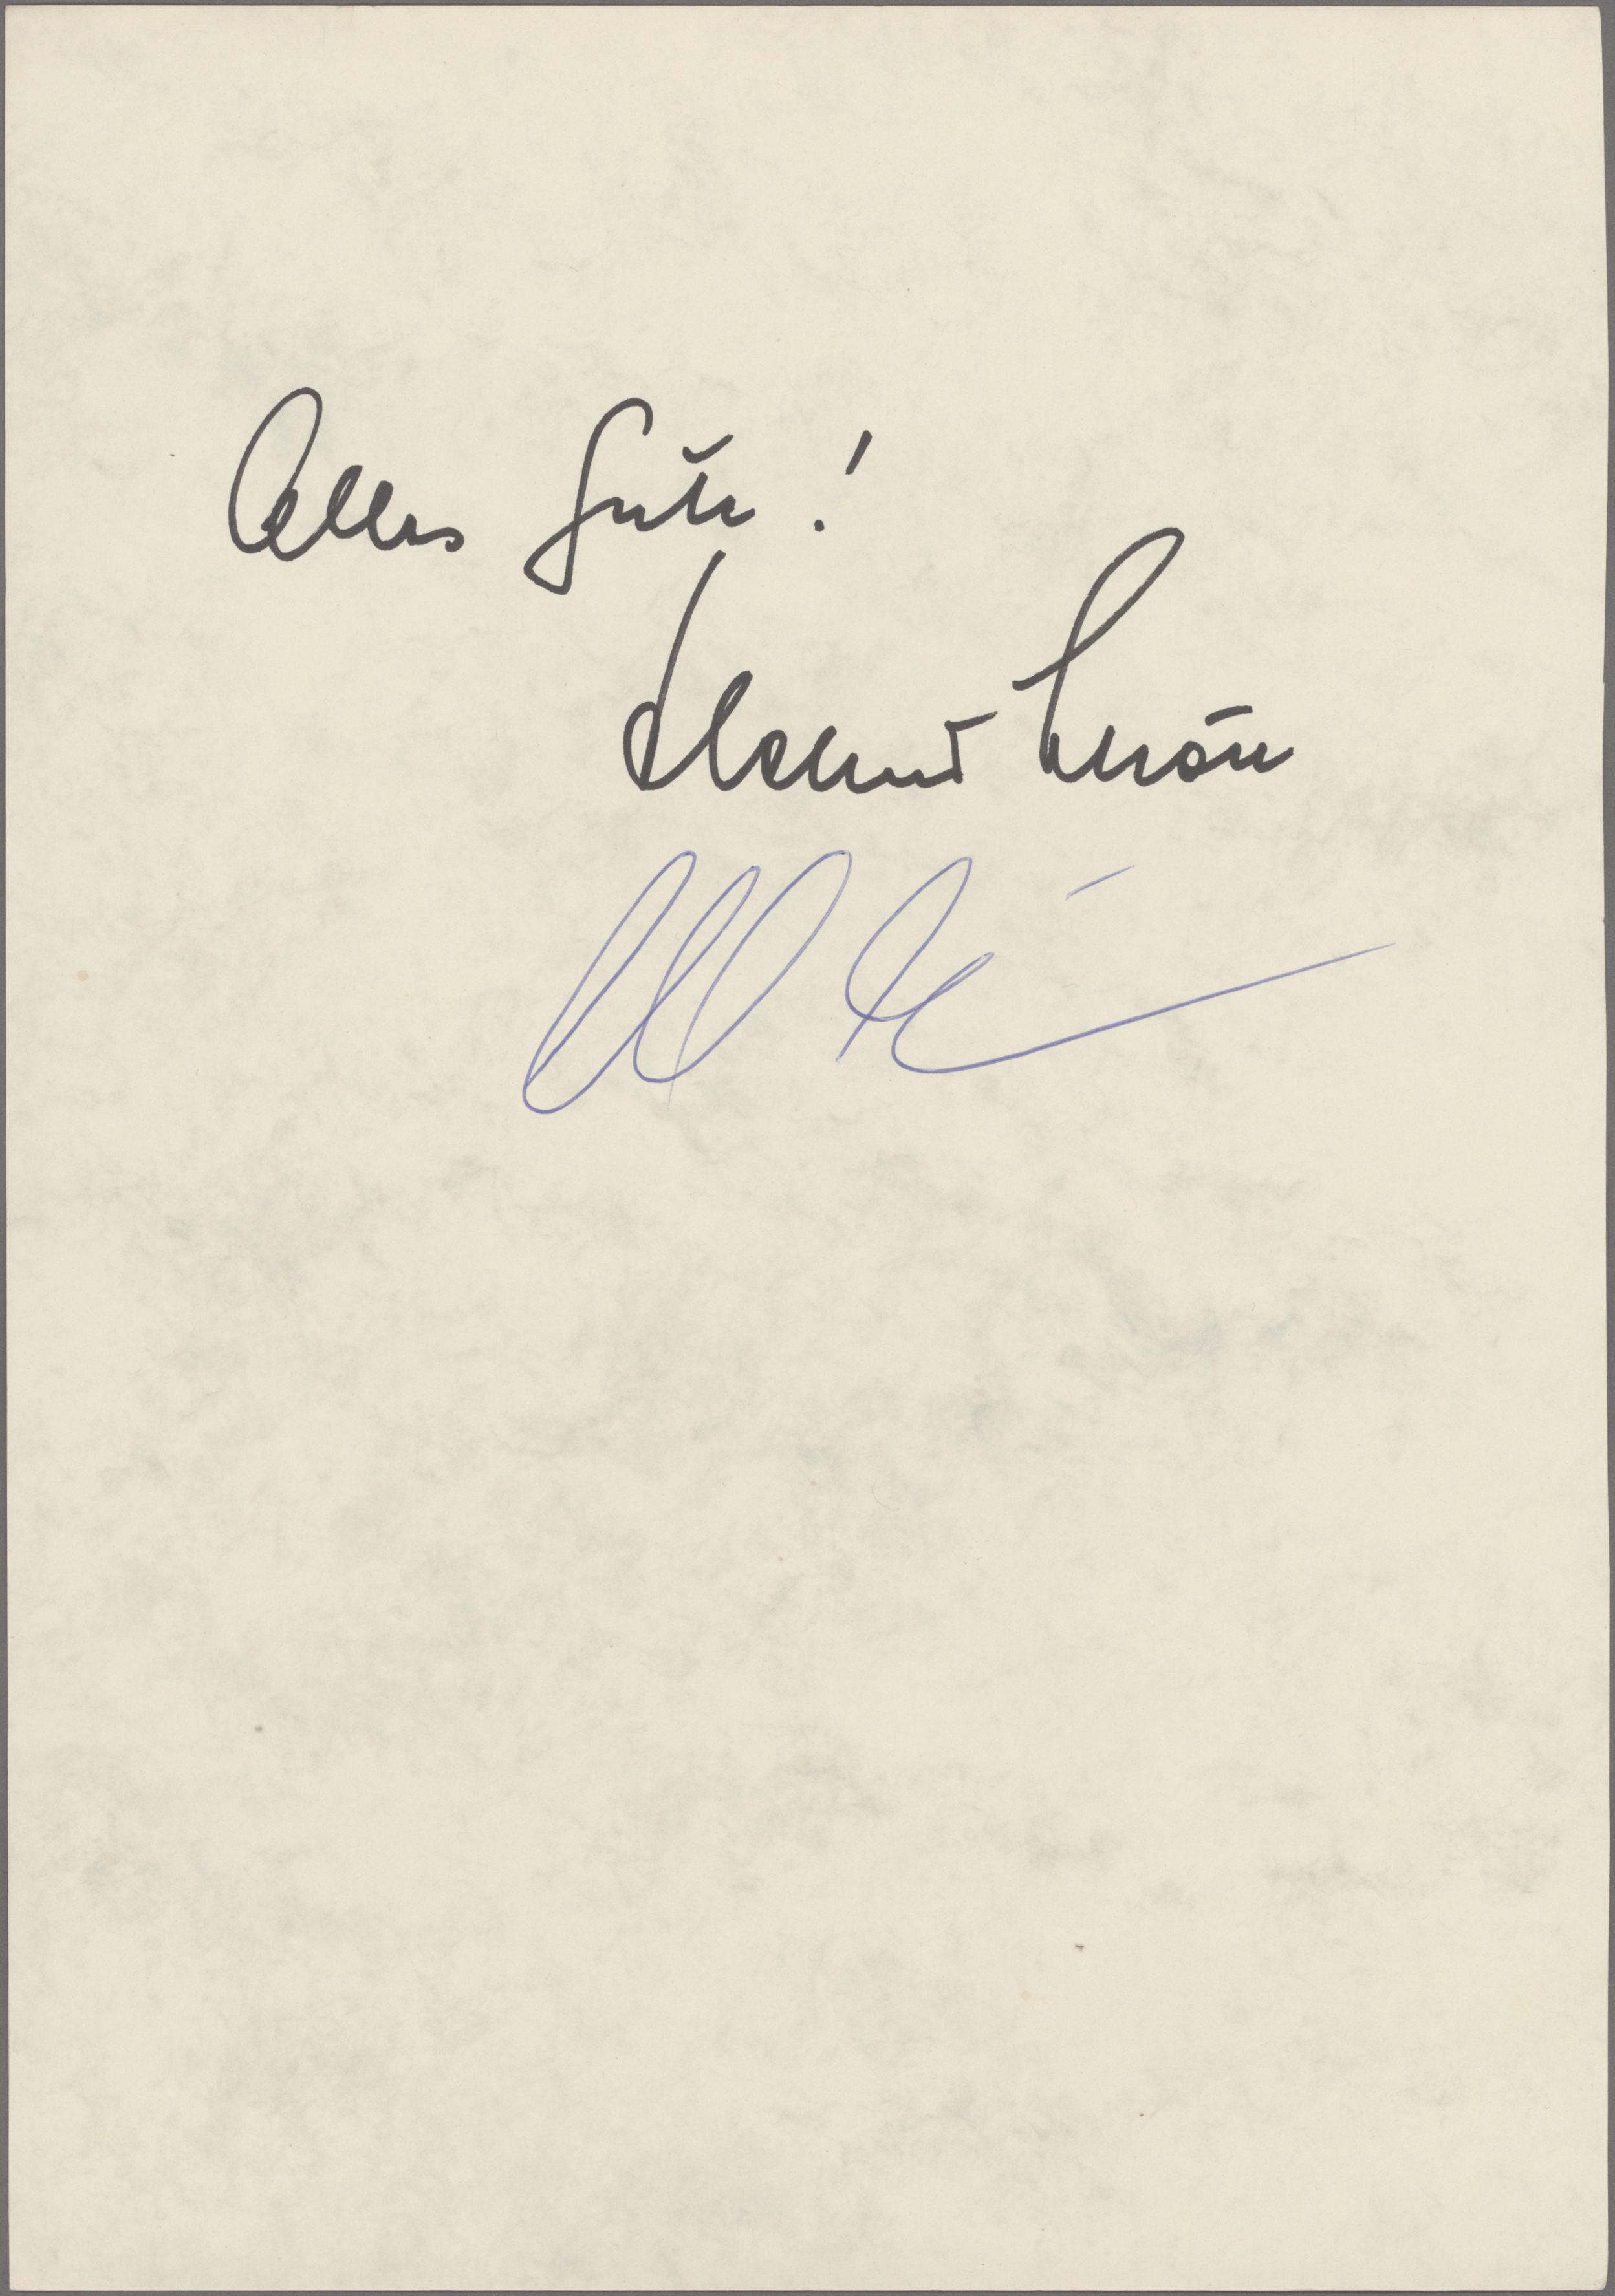 Lot 04670 - autographen  -  Auktionshaus Christoph Gärtner GmbH & Co. KG 53rd AUCTION - Day 3 Germany